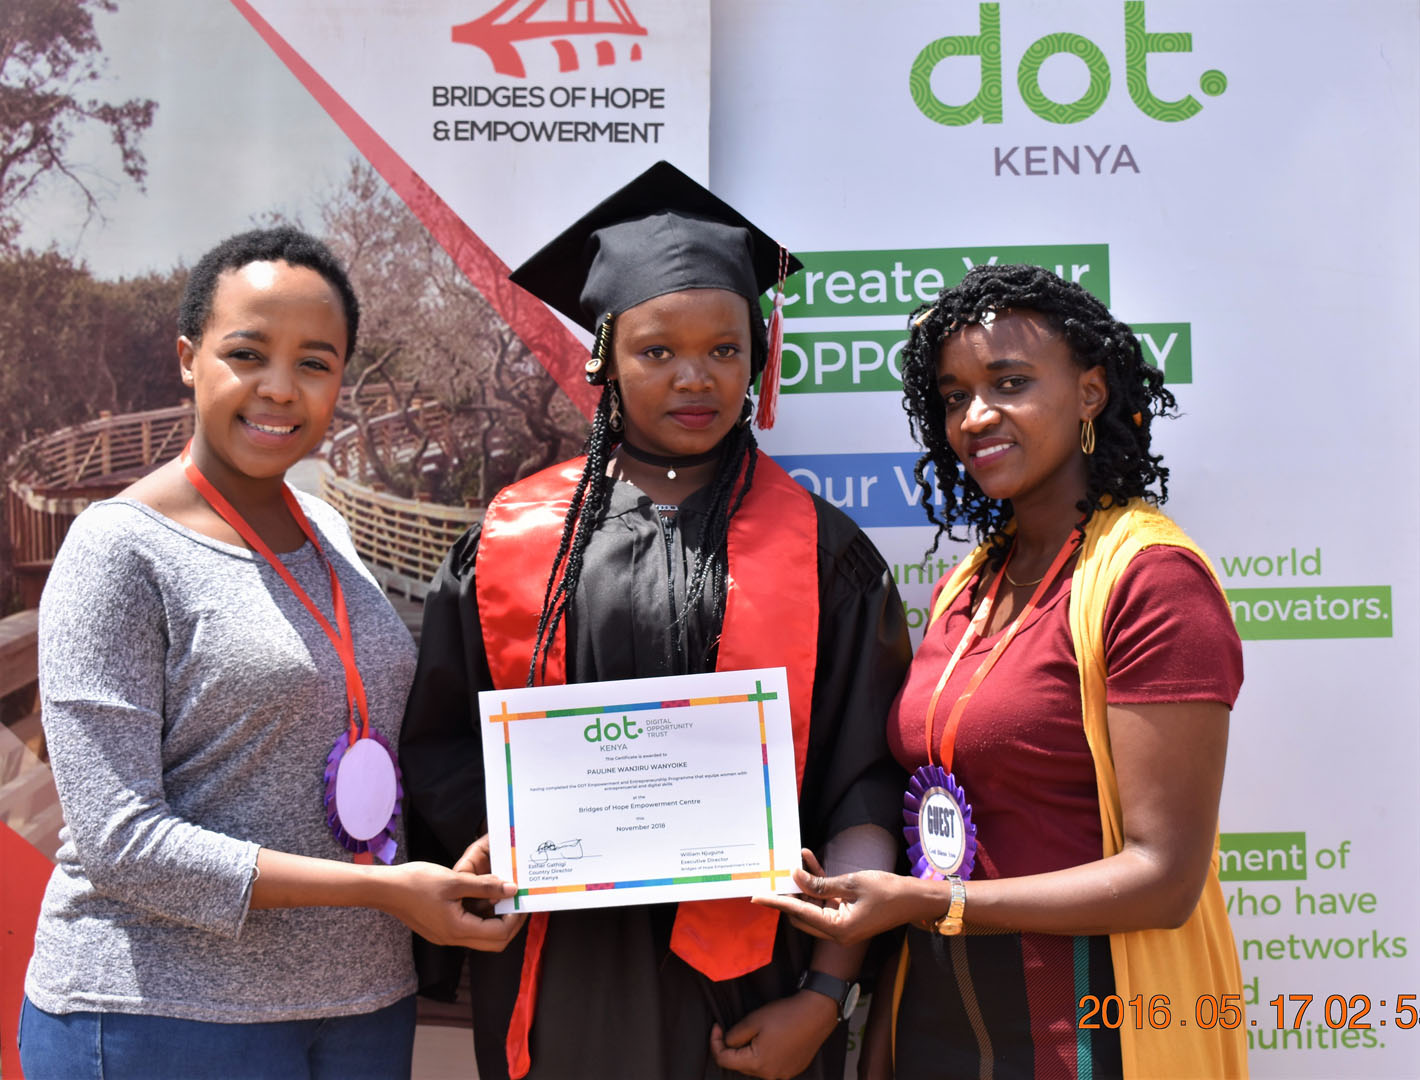 Three women holding a diploma and smiling for the camera.